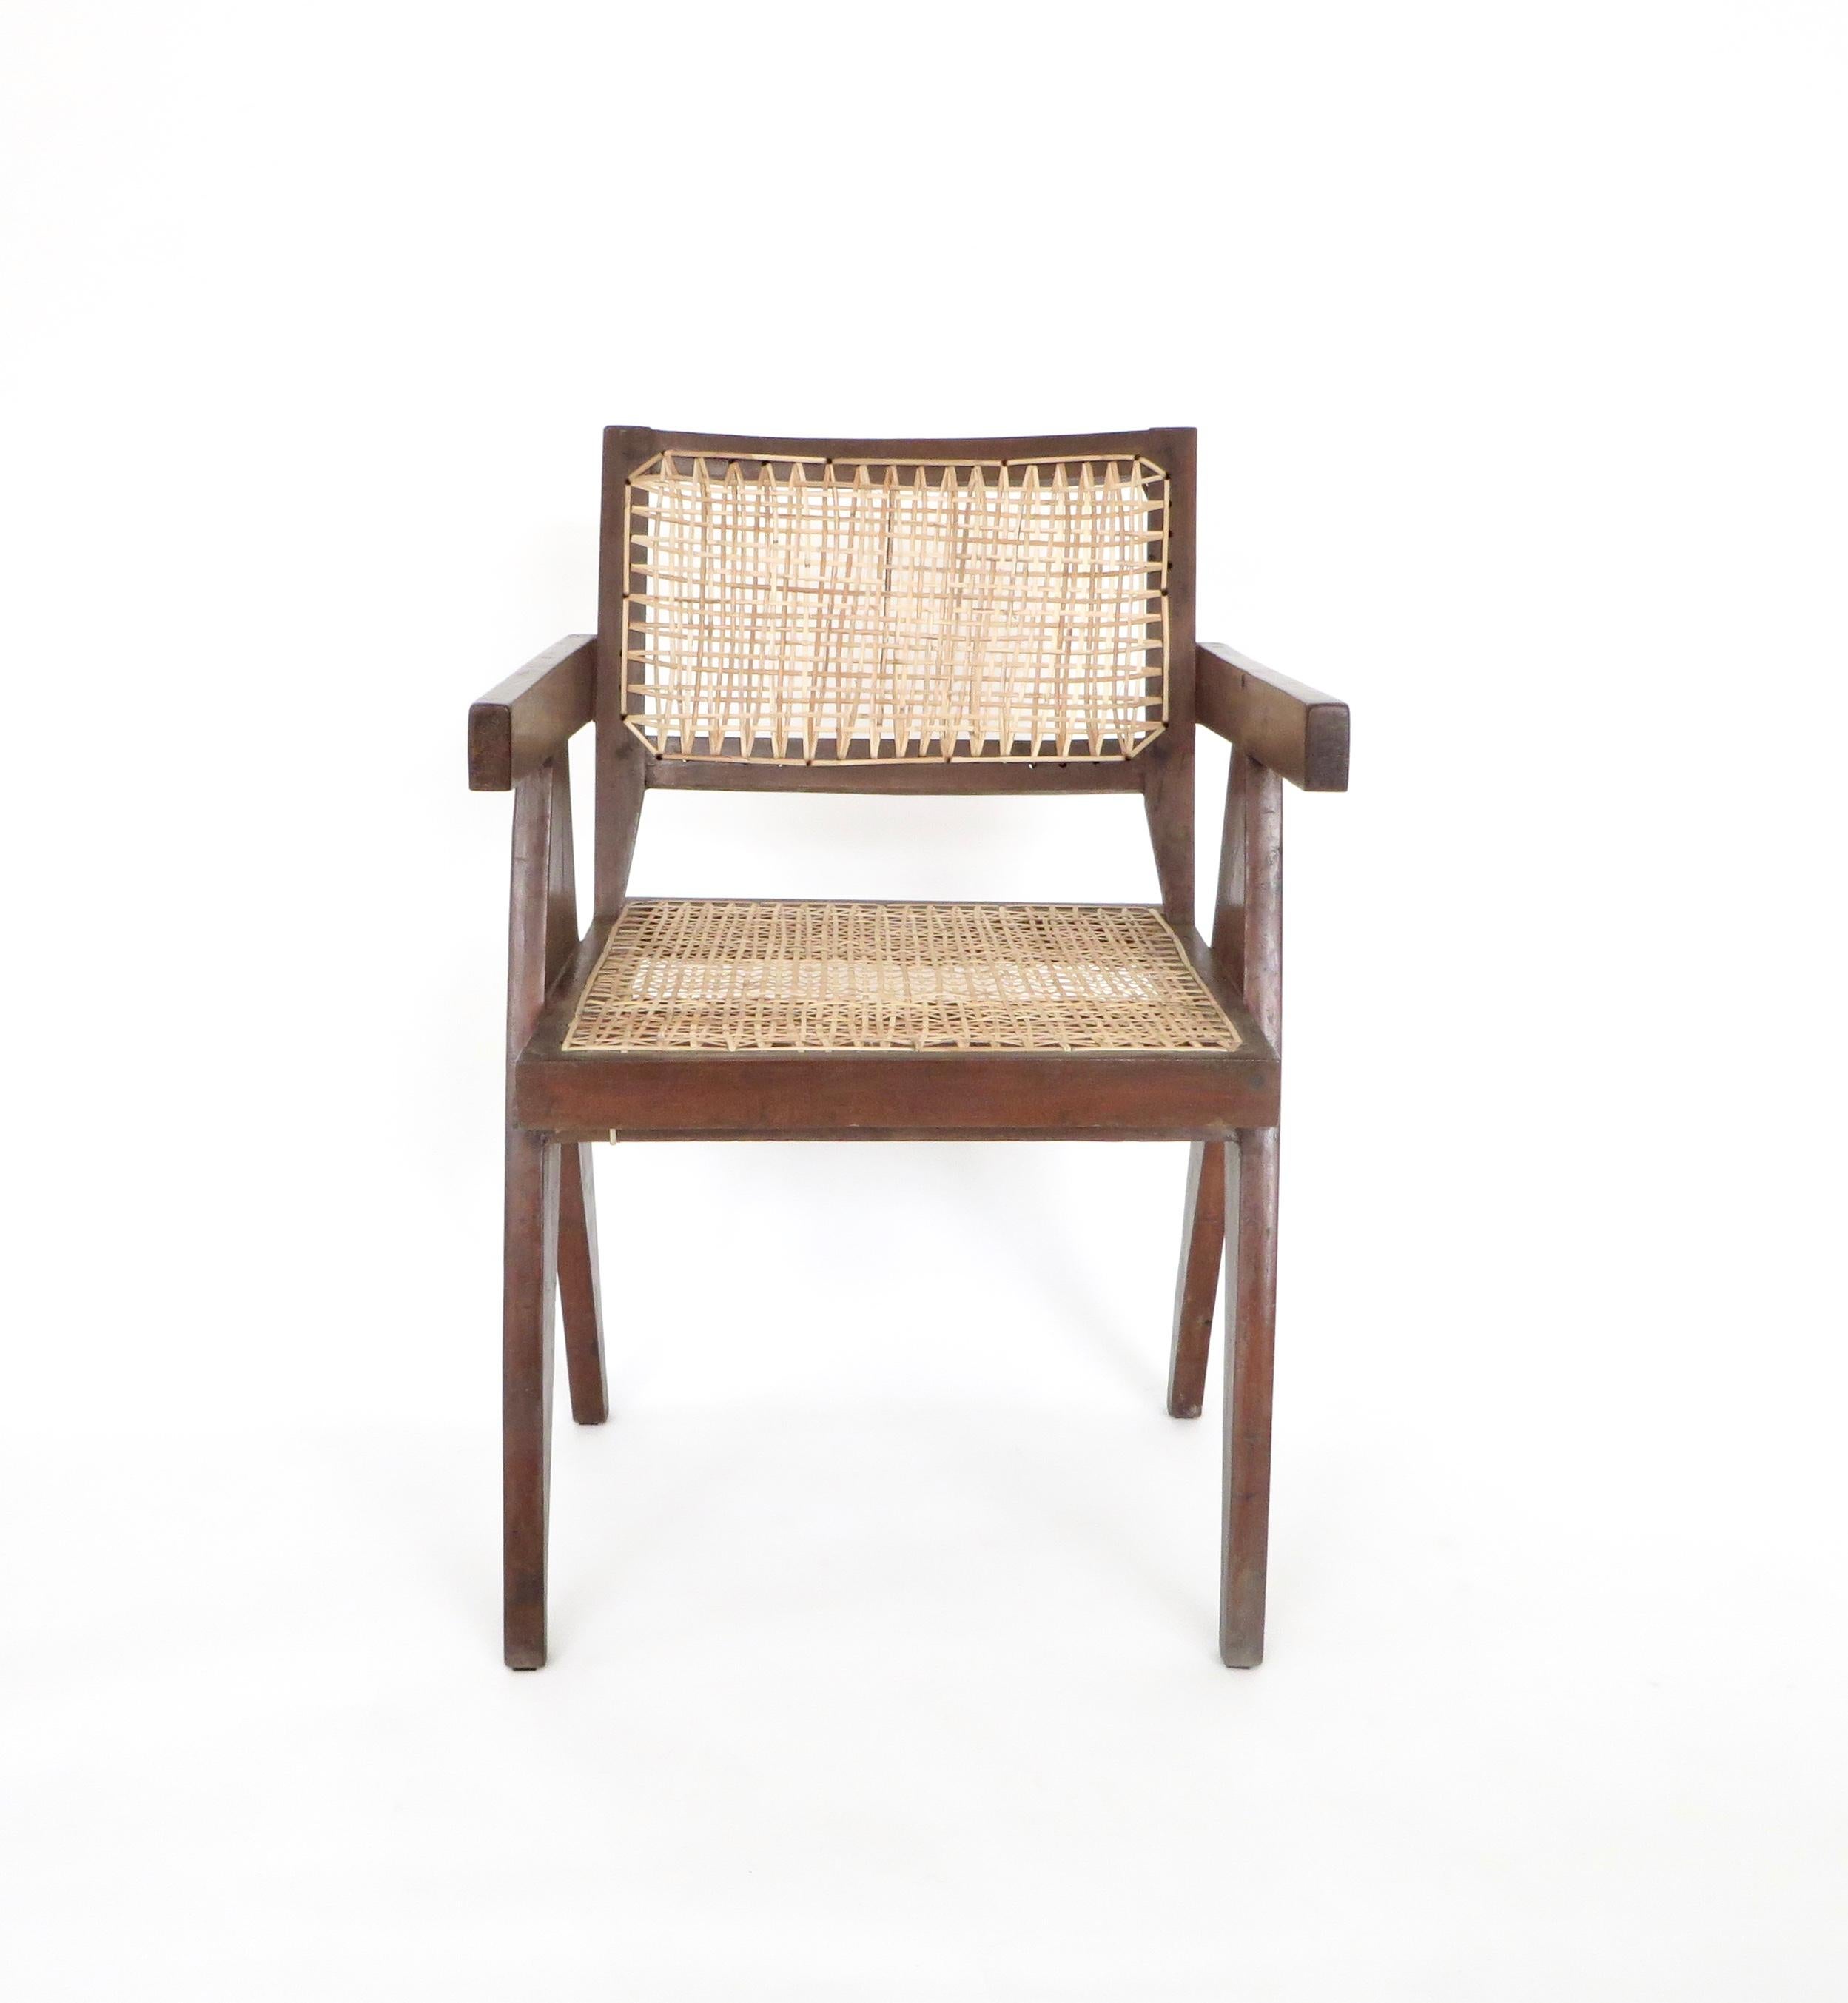 Mid-20th Century Pierre Jeanneret Teak and Cane Office Vintage Original Armchair from Chandigarh